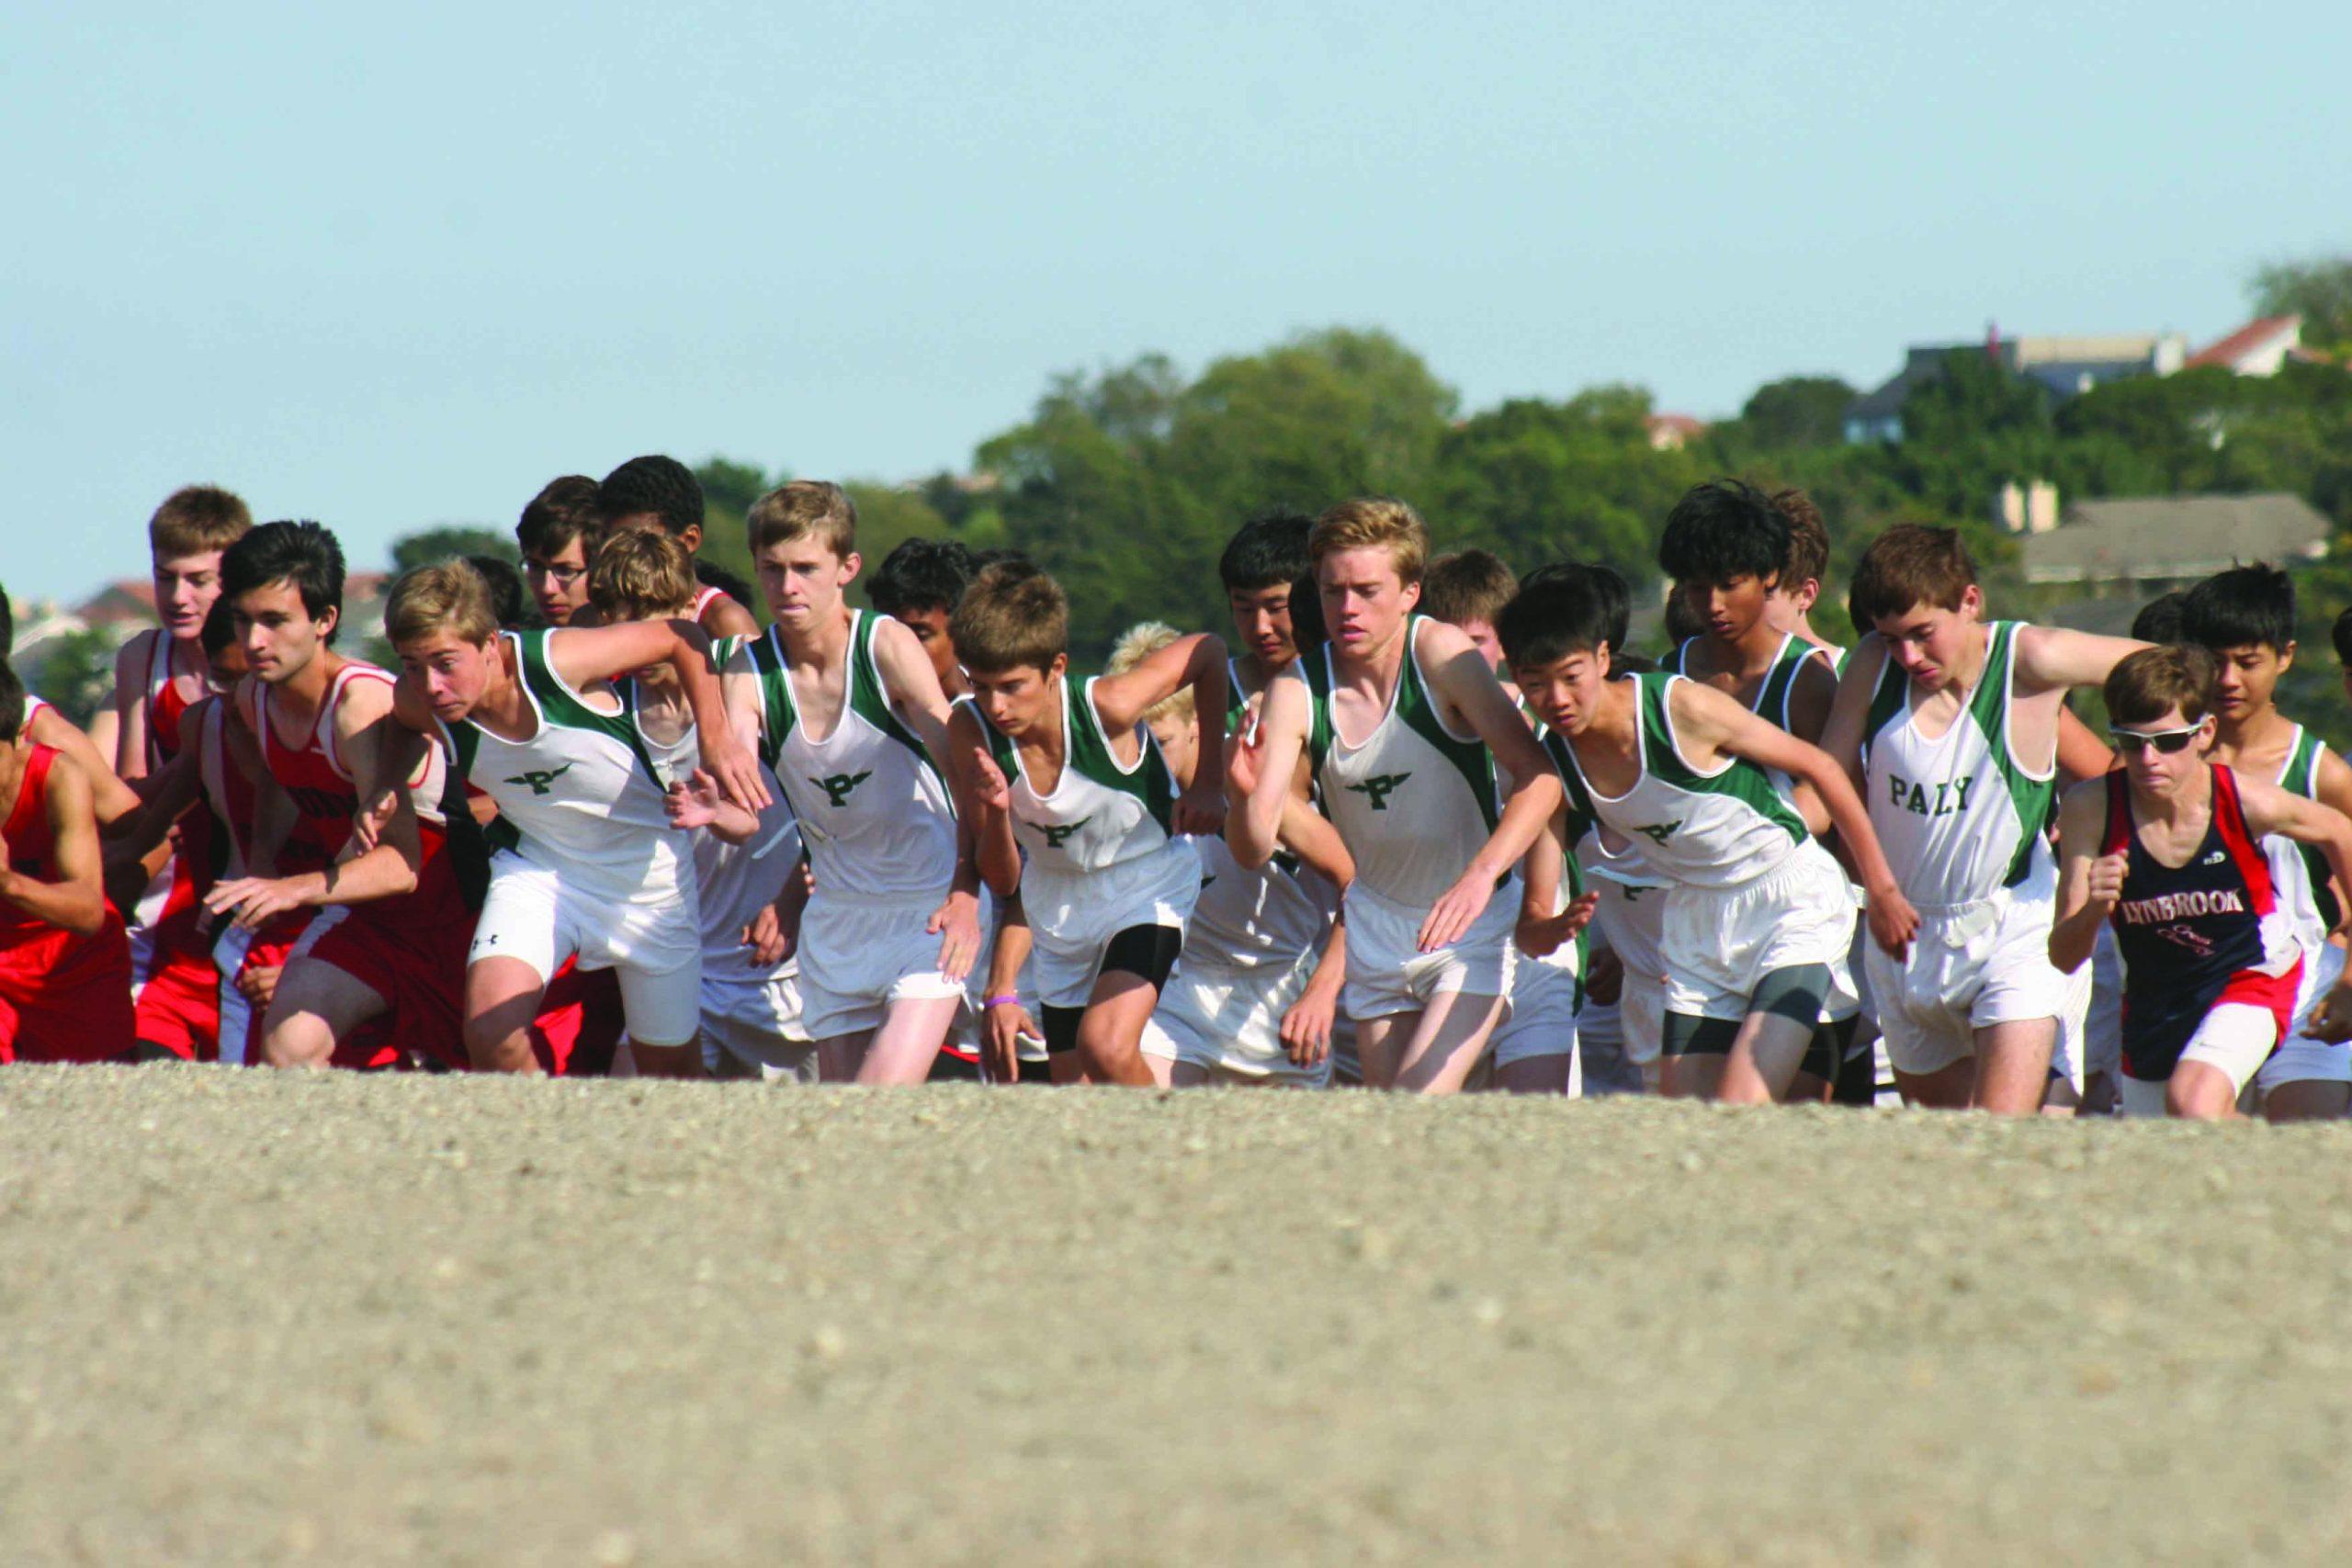 The boys’ cross country team, pictured here at the Crystal Springs cross country course, placed ninth at CCS.